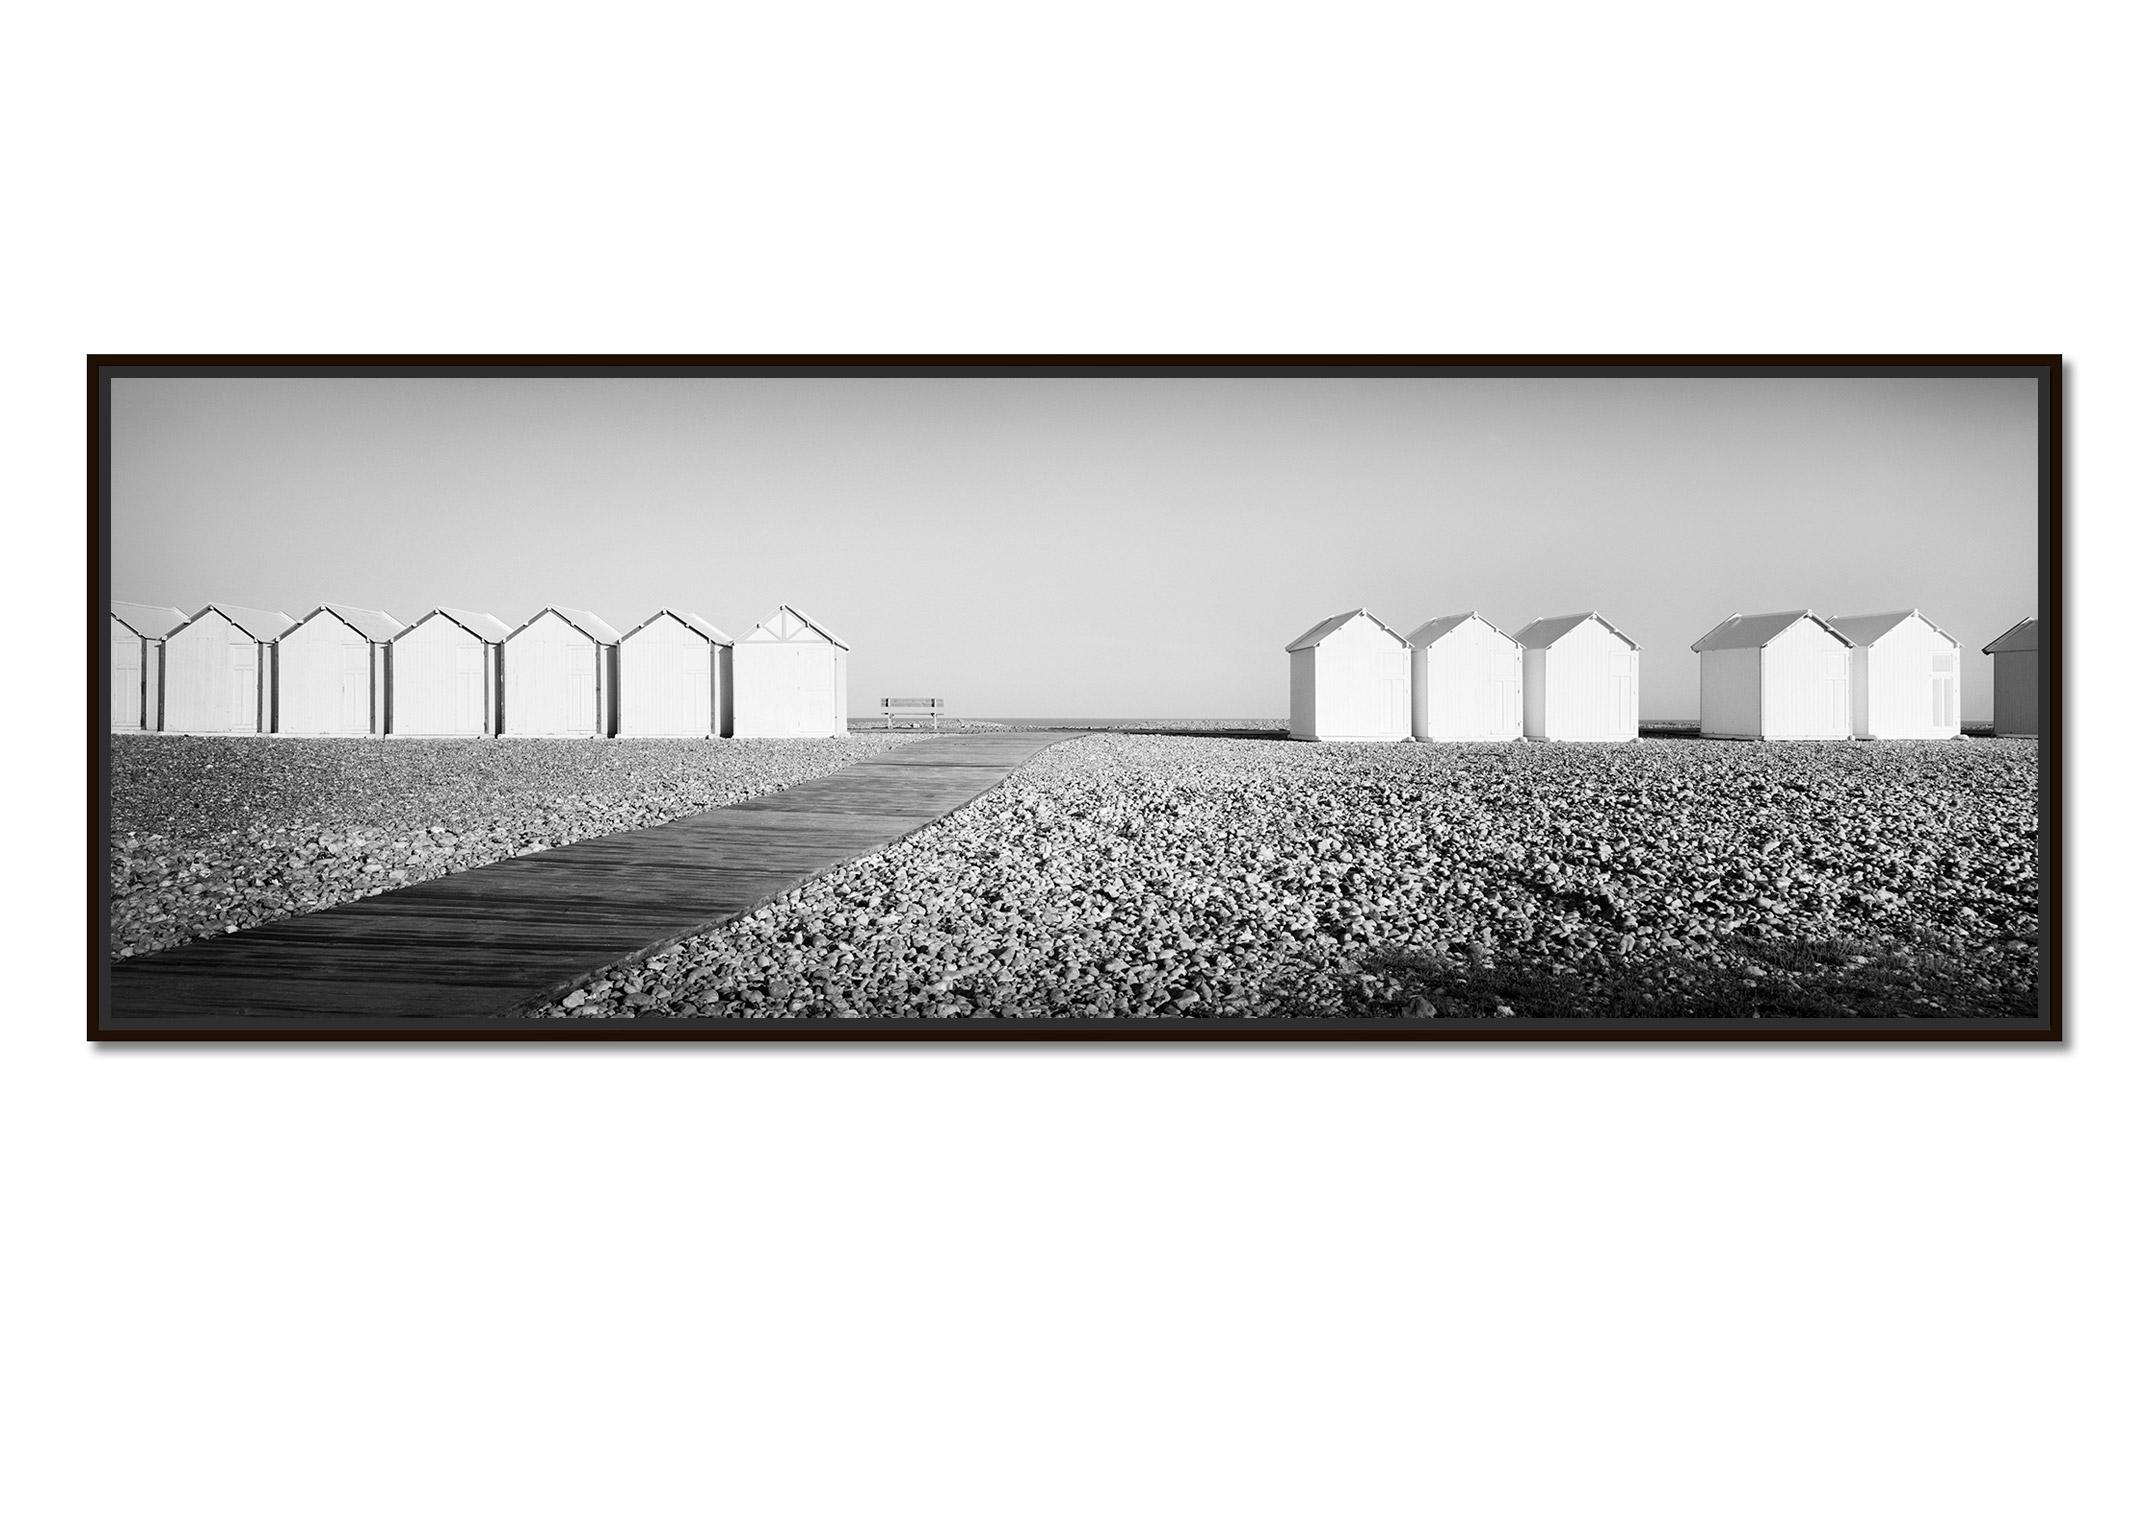 Beach Huts Panorama, bench, stones, France, black & white landscape photography - Photograph by Gerald Berghammer